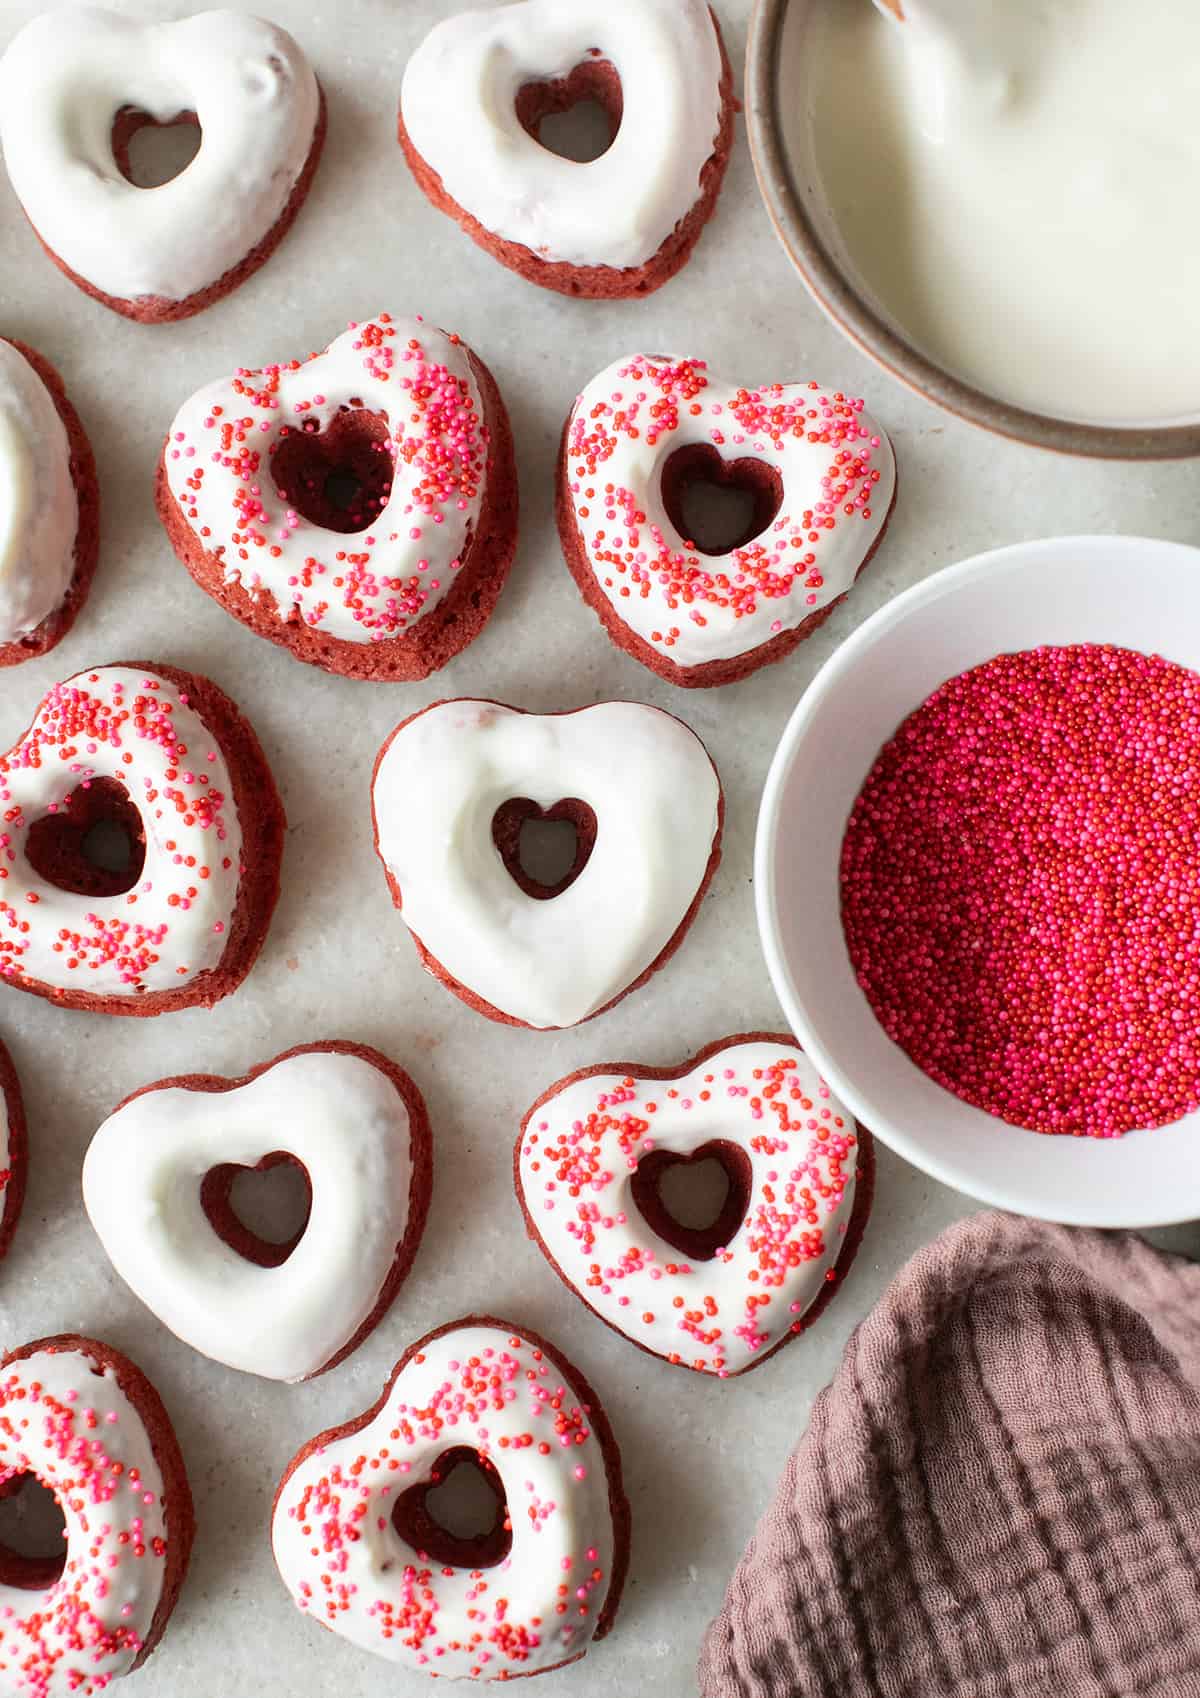 Baked red velvet donuts with cream cheese glaze.